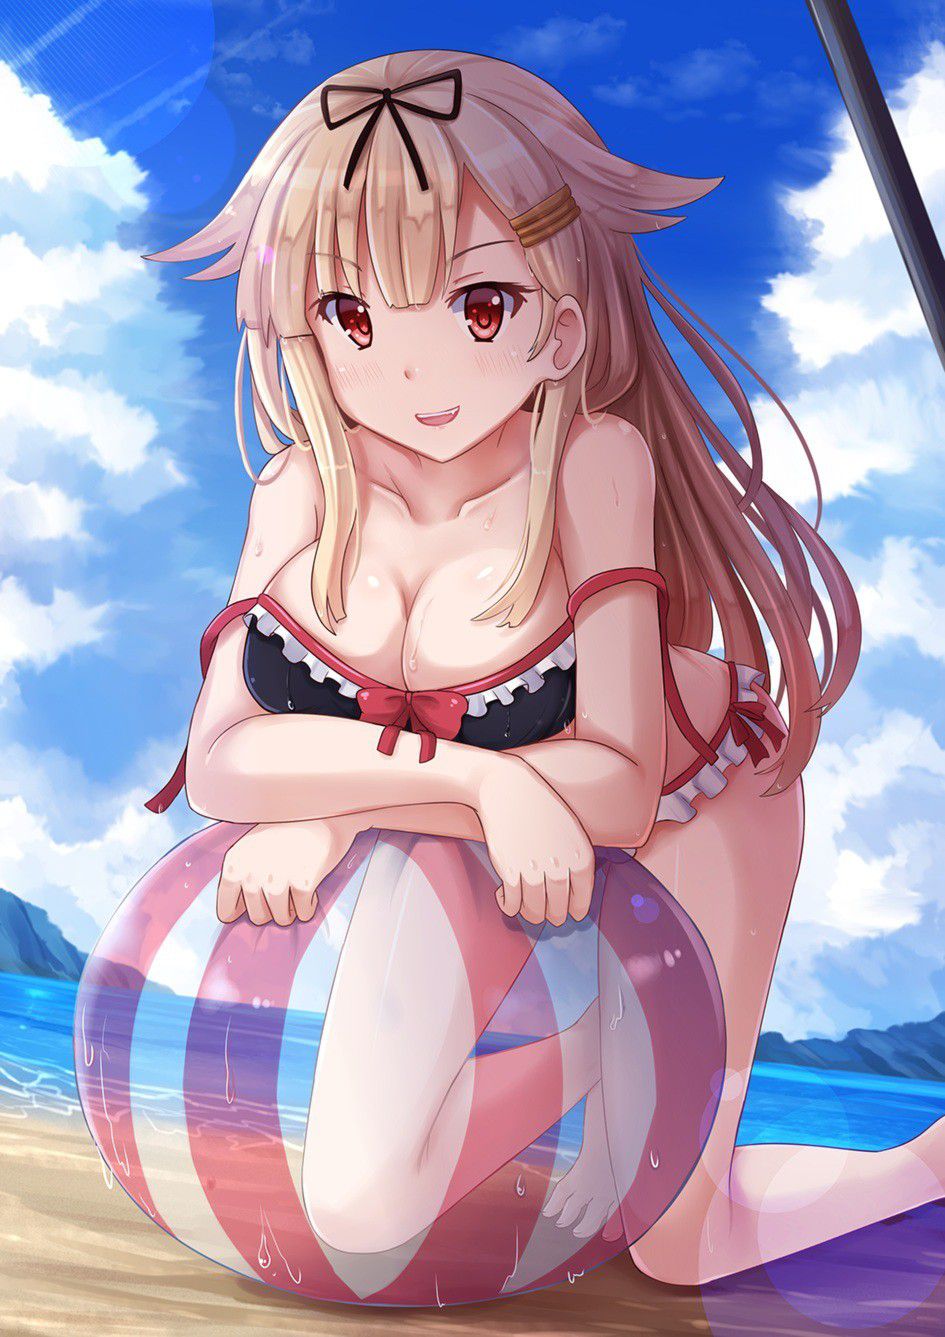 I want to expose the important part by shifting the swimsuit lewd image of a swimsuit with a small cloth area 10